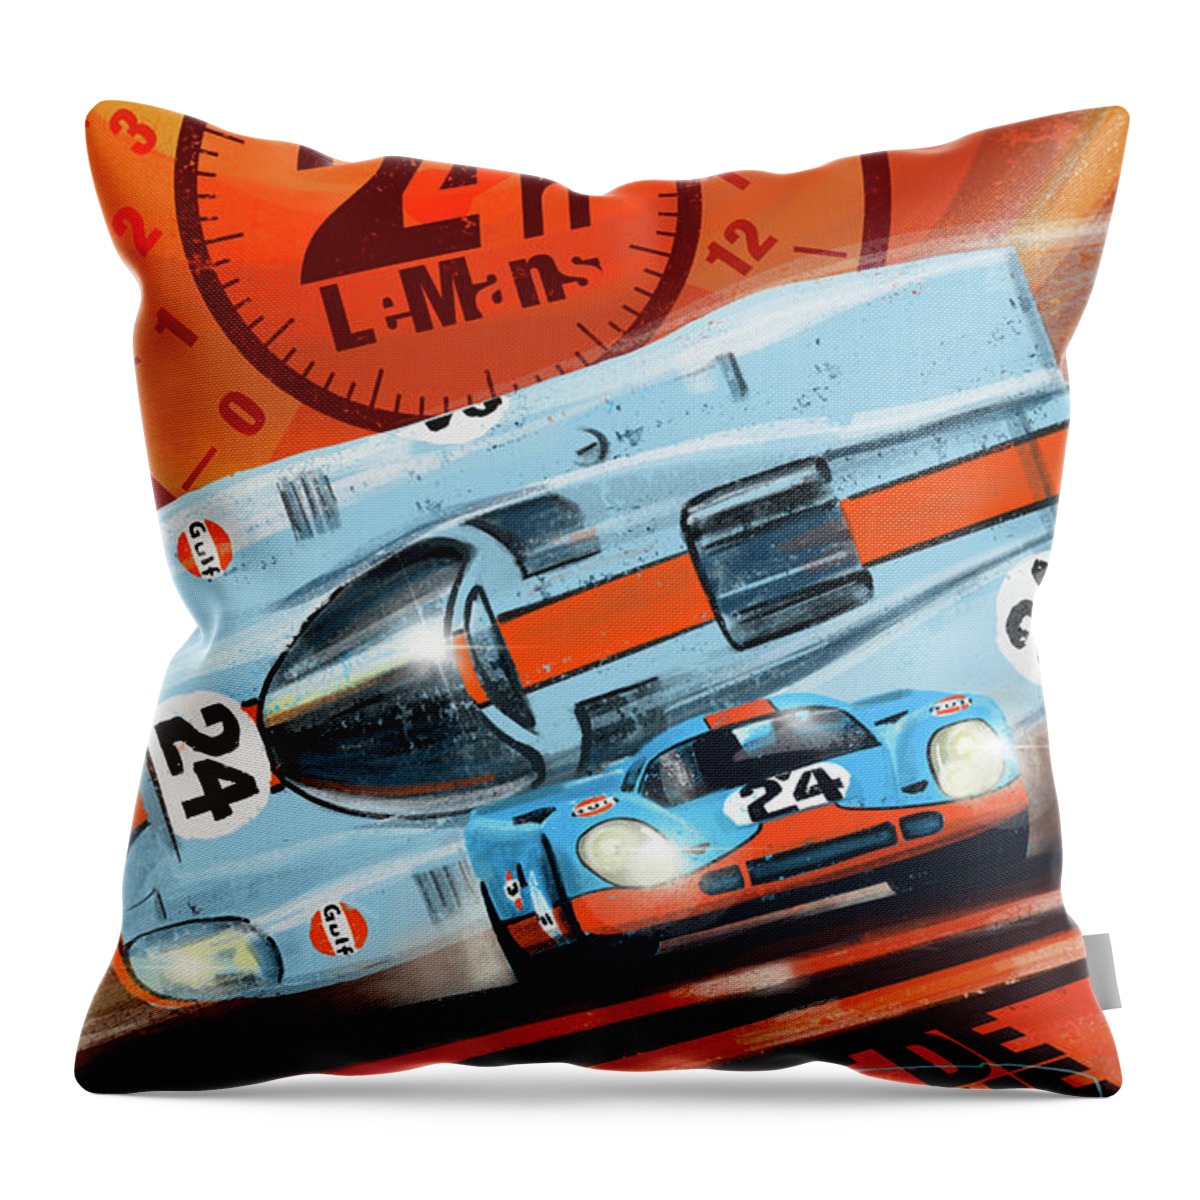 Le Mans Throw Pillow featuring the painting Le Mans 24H by Sassan Filsoof